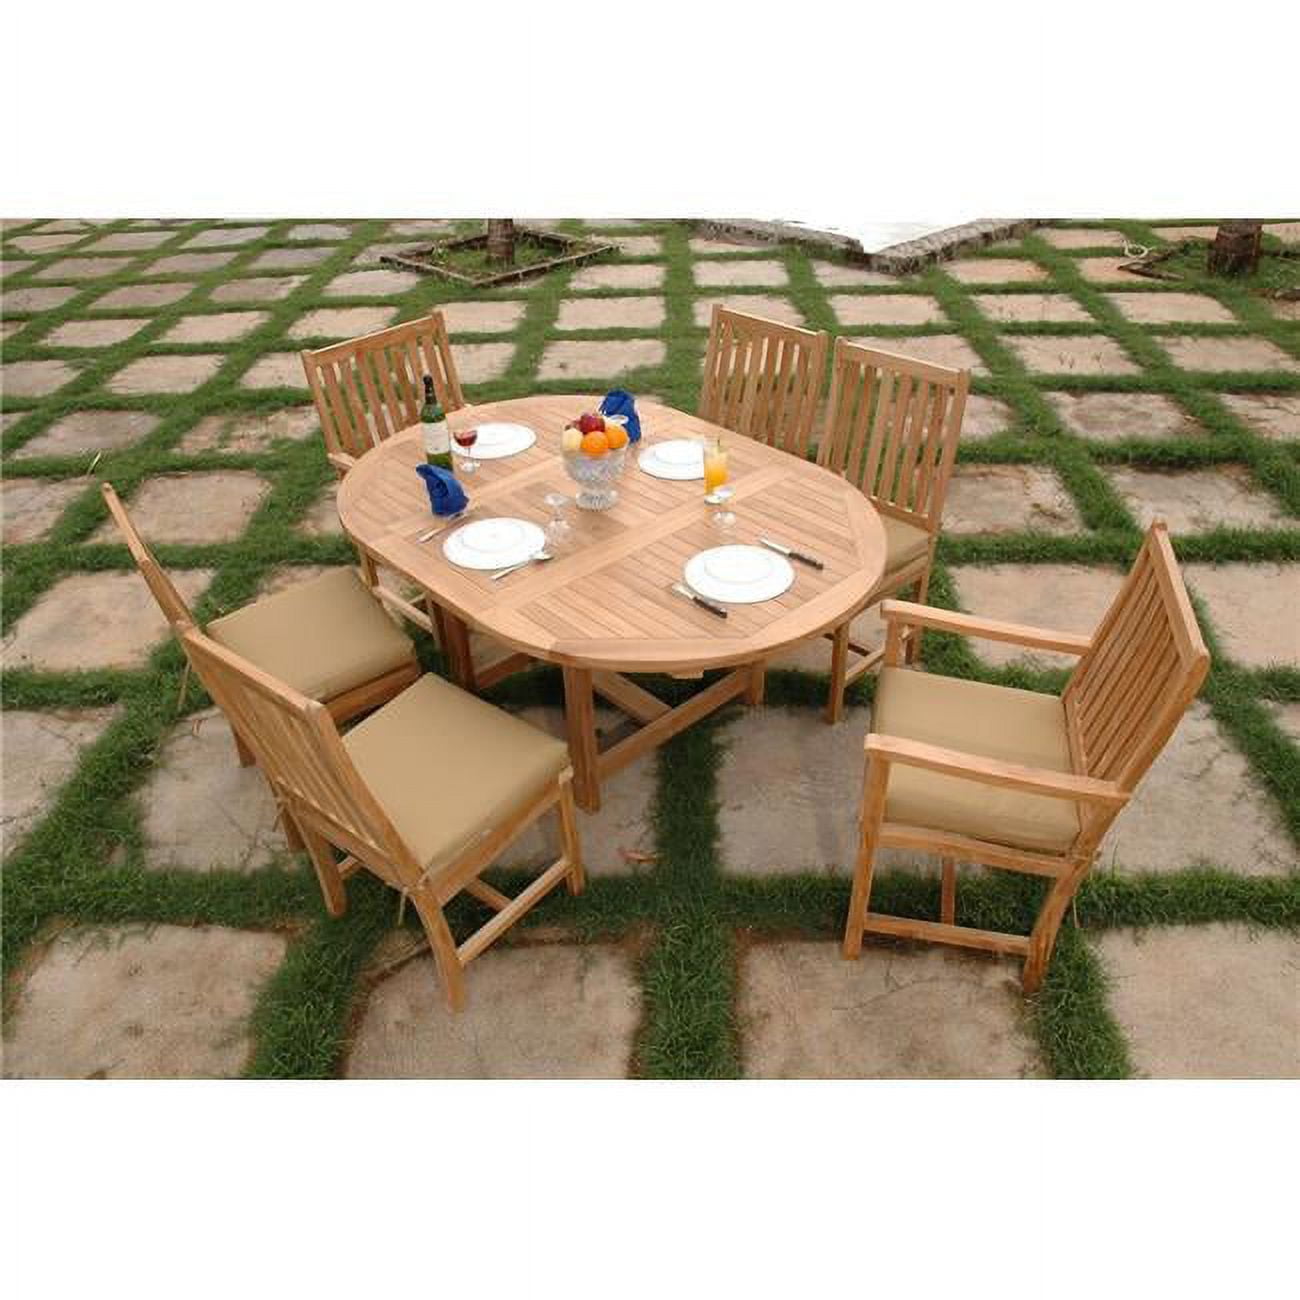 Set-26 67 In. Oval Extension Table